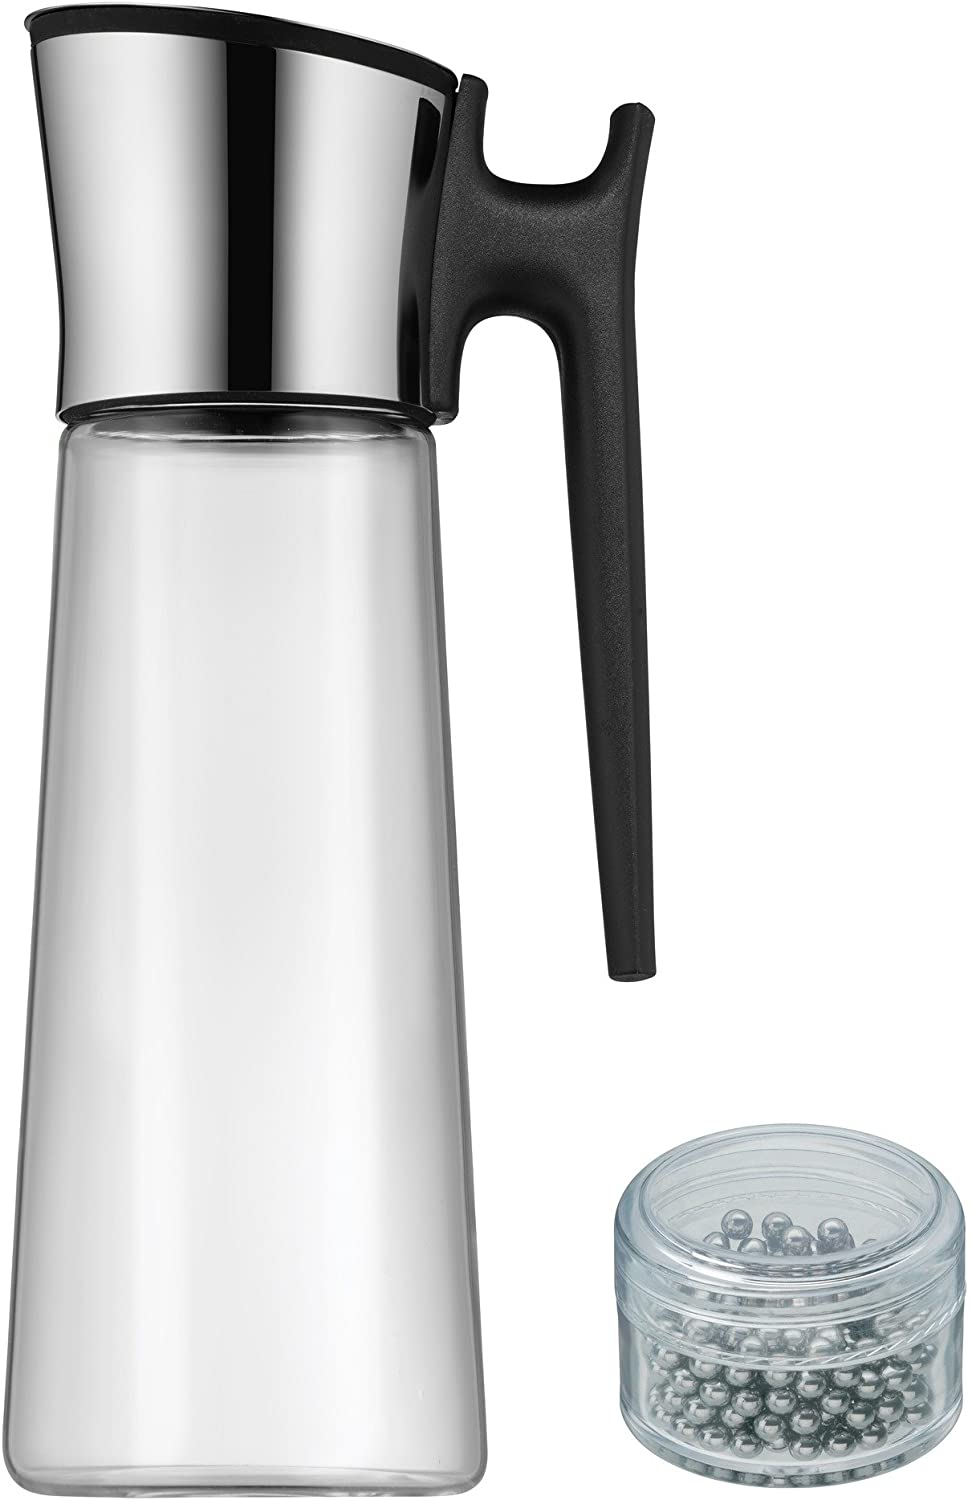 WMF Basic Water Carafe 1.5 Litres Glass Carafe with Lid and Handle 1.5 Litres Cleaning Beads Silicone Lid CloseUp Closure